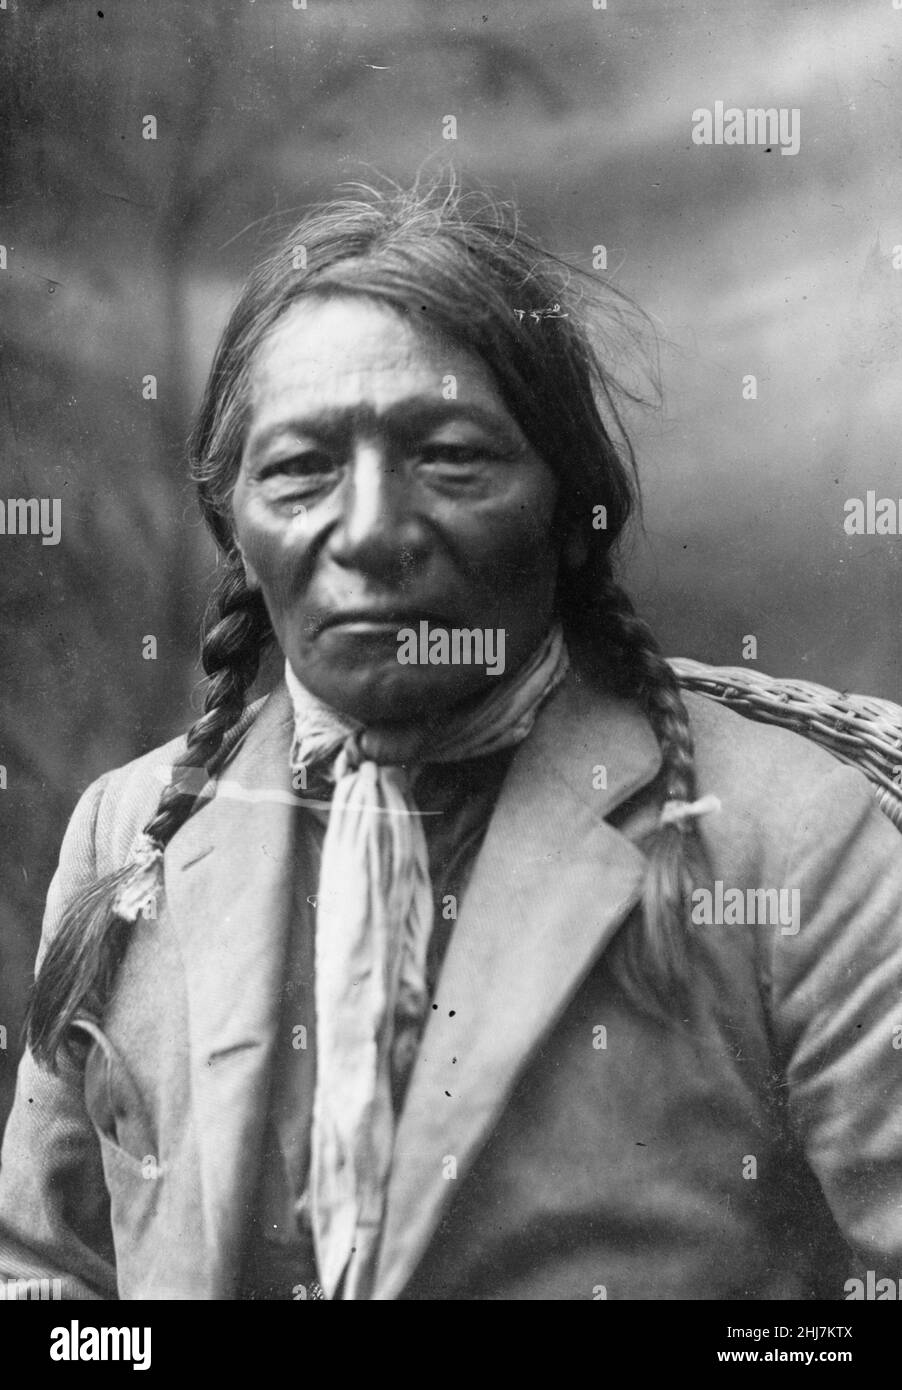 Native american Chief White Crow - Samuels & Mays, Meeker, Colorado. C 1902. Ute indian. Stock Photo